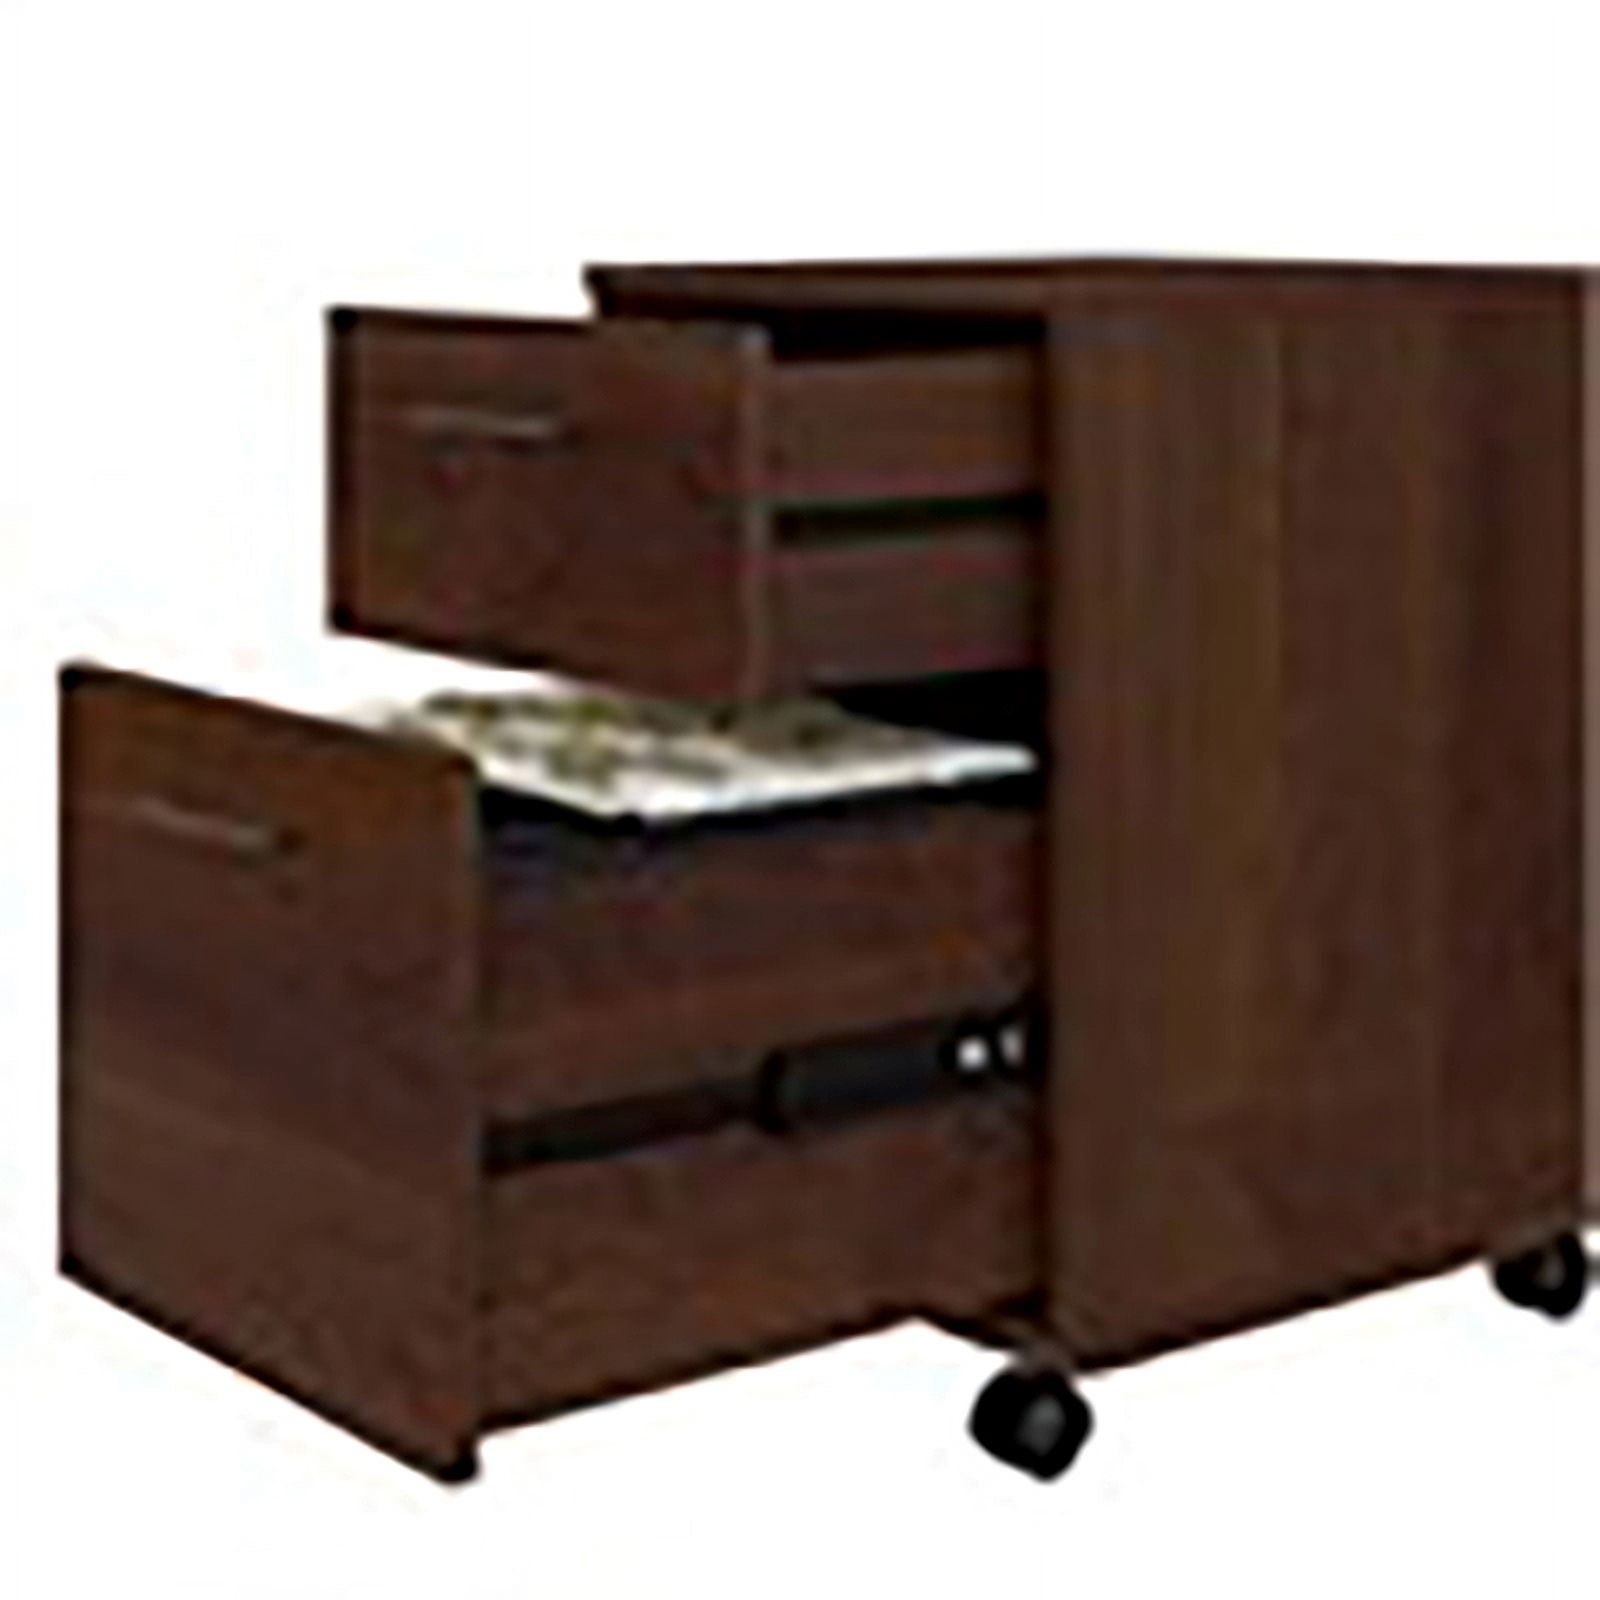 Scranton & Co 2-Drawer Wood Mobile File Cabinet in Bing Cherry - image 4 of 8